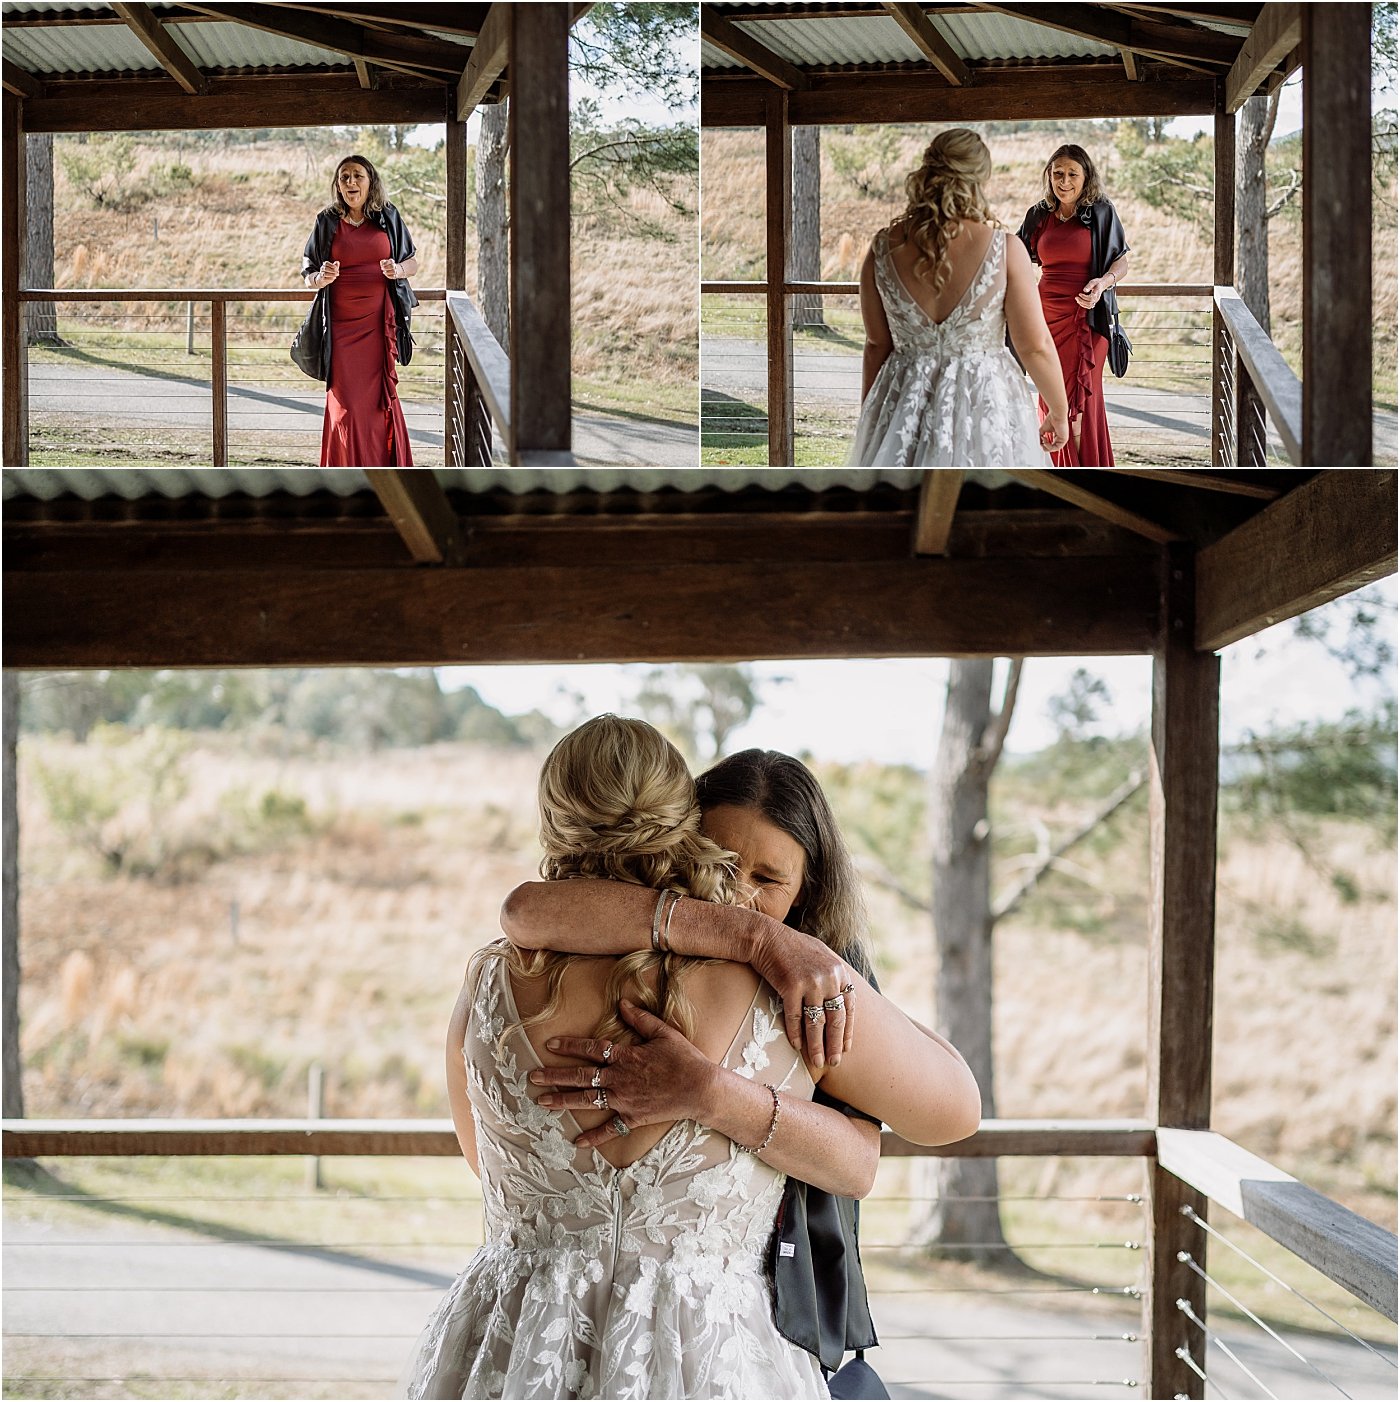 Mother seeing daughter in wedding gown for the first time